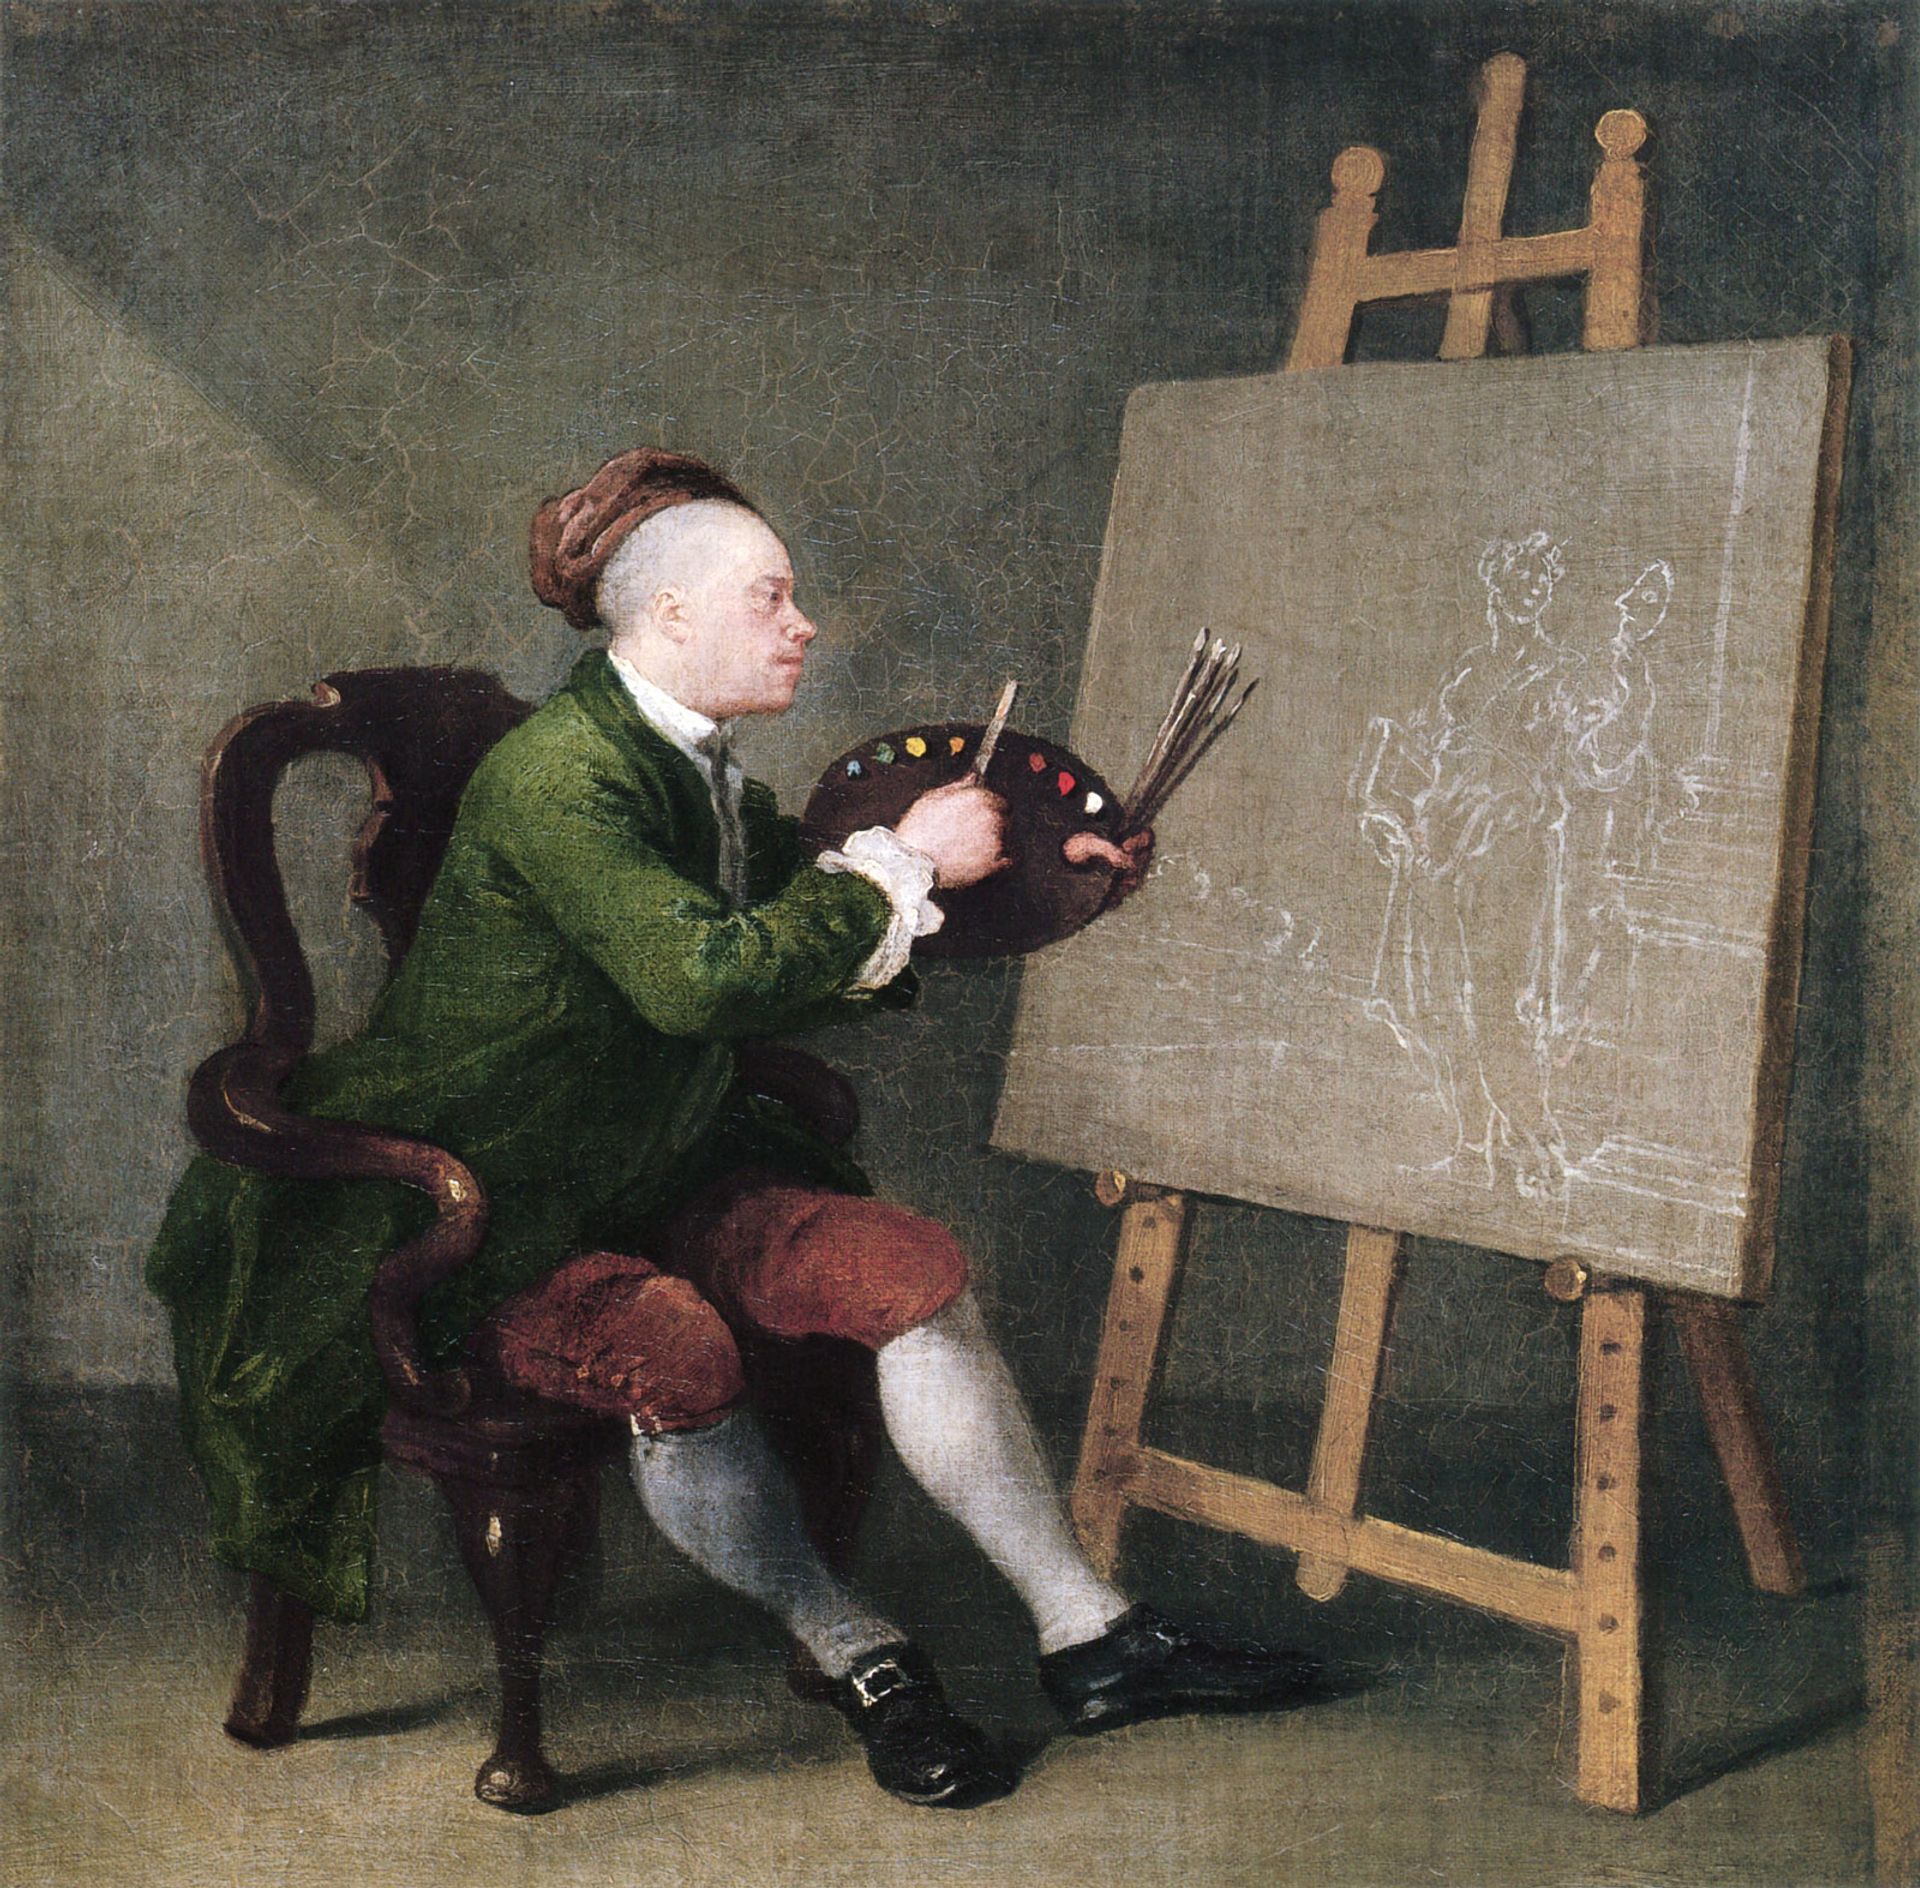 A text label accompanying this Hogarth self-portrait suggests the chair might be a metaphor for oppressed Black people National Portrait Gallery